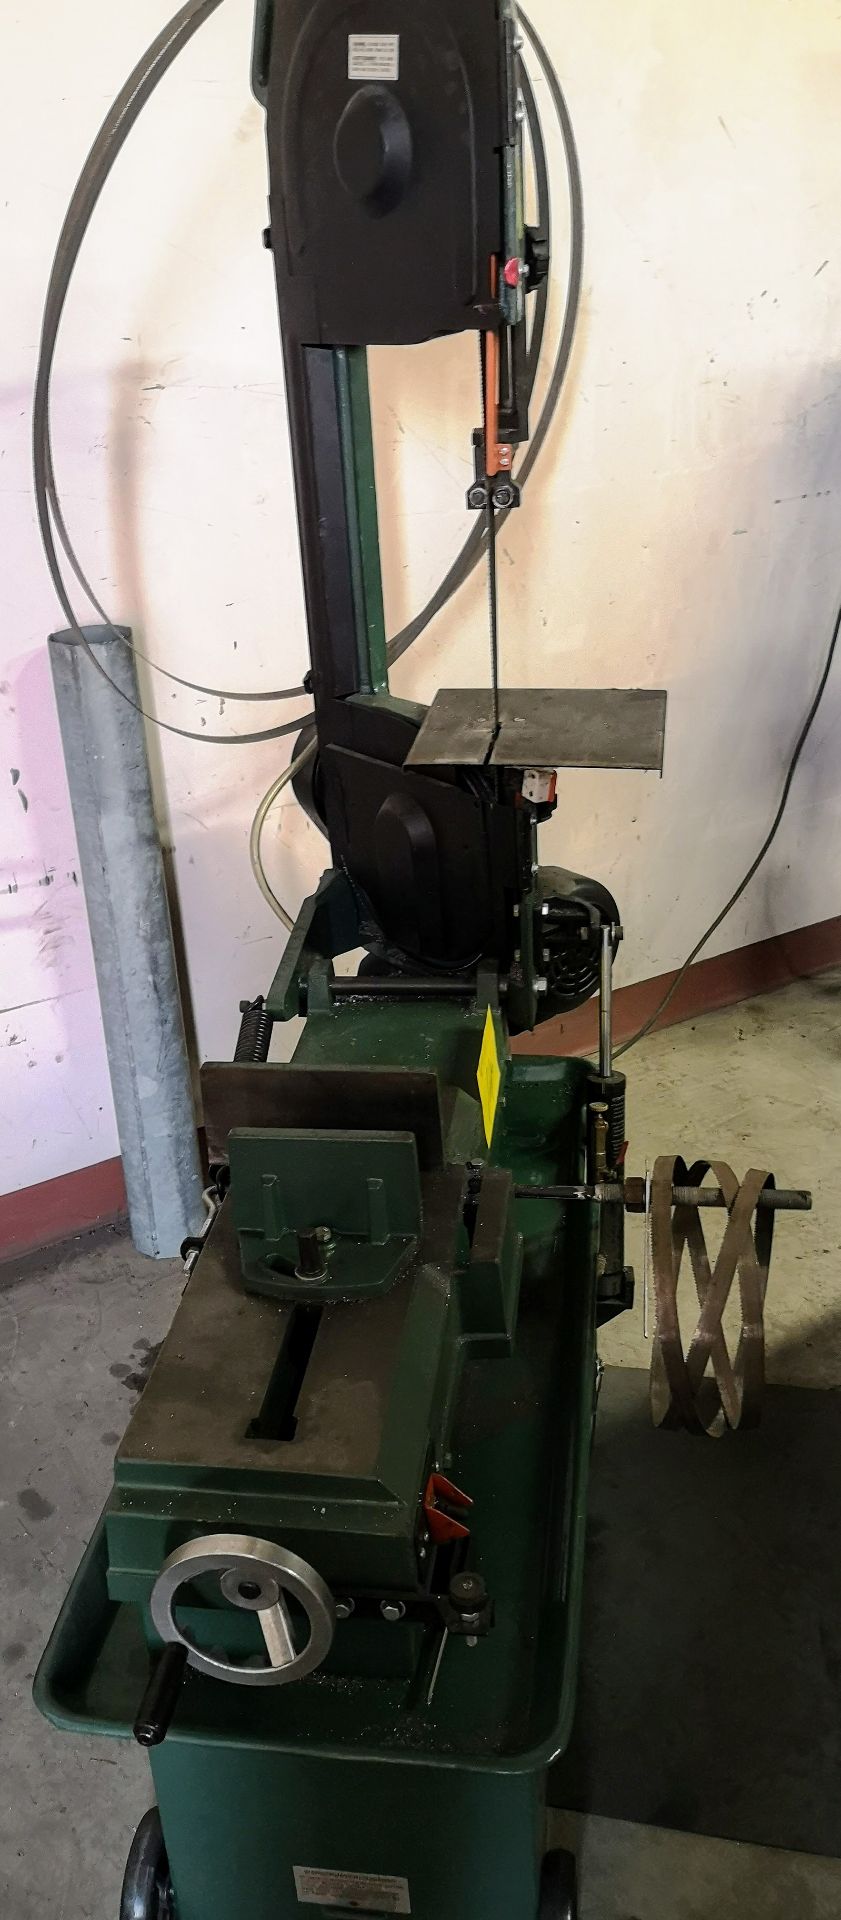 CRAFTEX 7" METAL CUTTING BANDSAW - Image 3 of 4